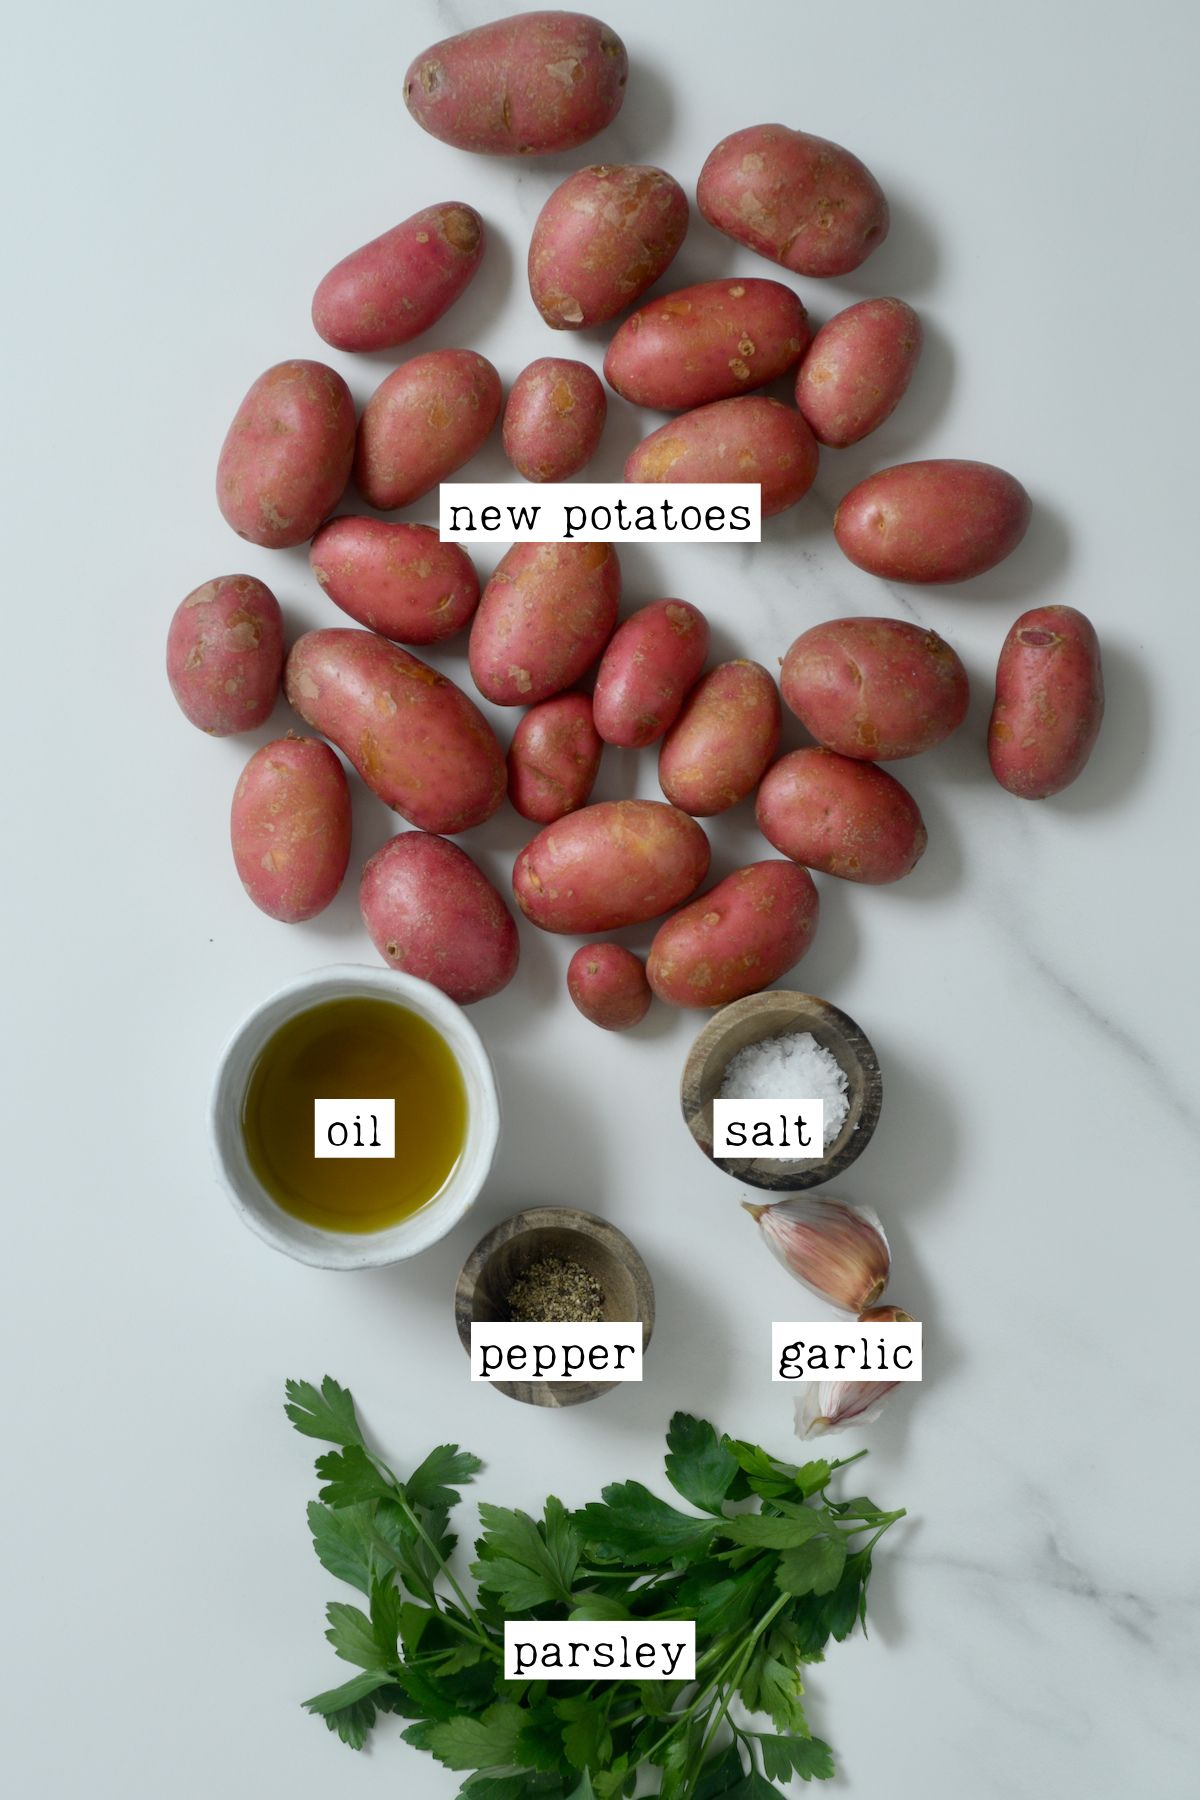 Ingredients for oven-roasted new potatoes